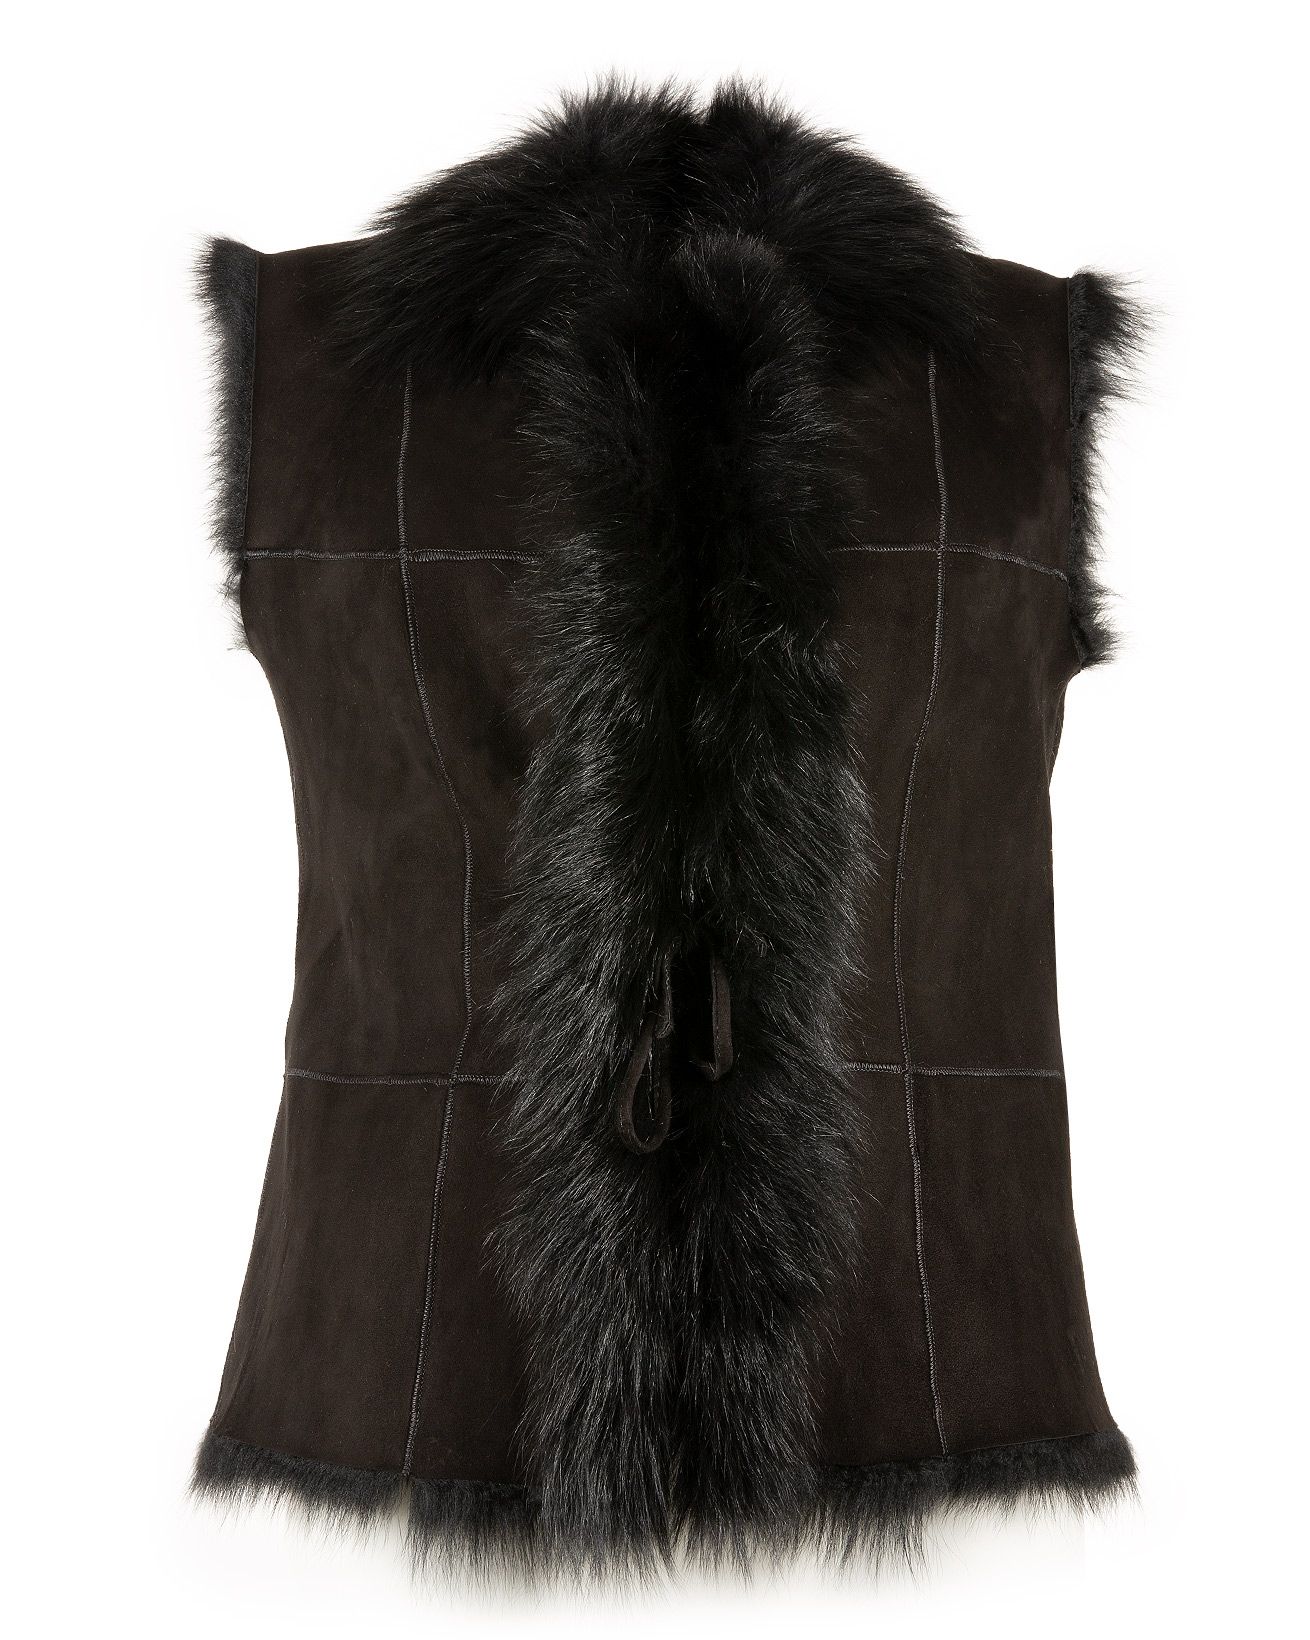 5800-gilet-black-suede-front-aw18.jpg